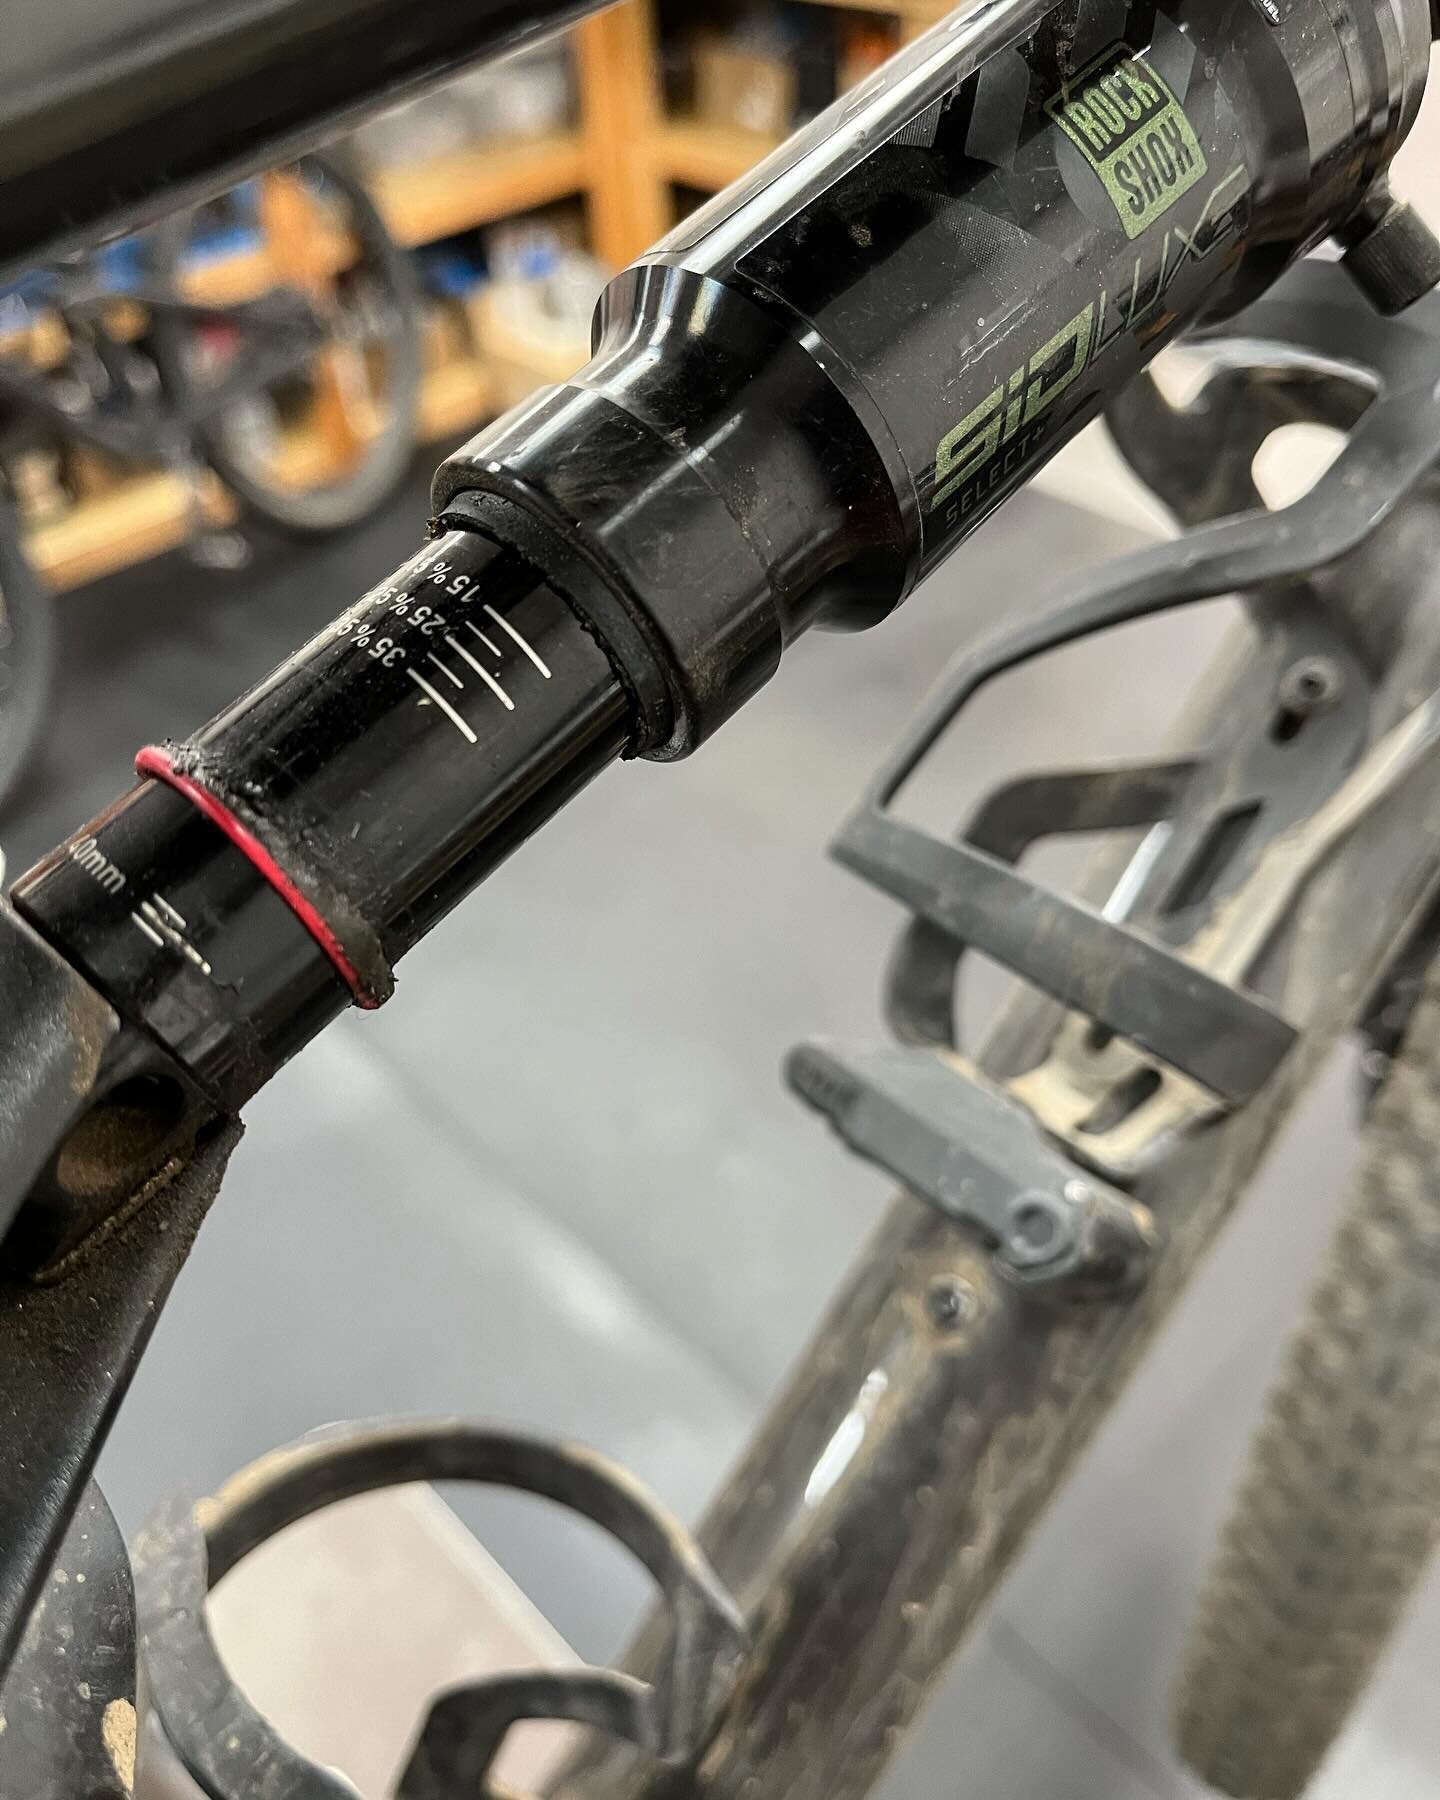 If your rear shock is leaking oil like this one was, now would be a good time to deal with it. Before you do more damage! The staff at Win&rsquo;s Wheels is here to help! Call or stop by.
#maintainance #monday #service #psa #suspention #bikemaintenan